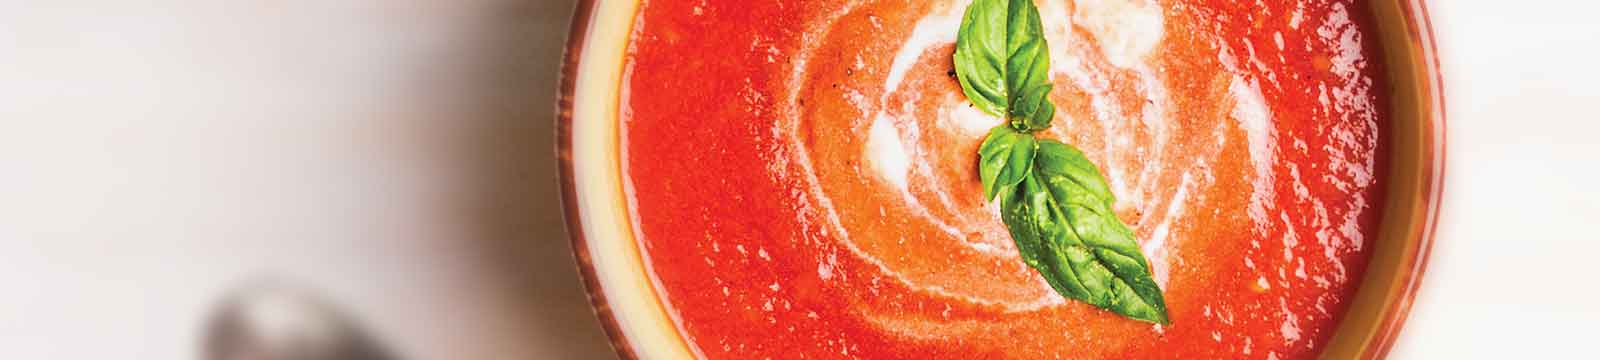 Tomato soup in a bowl with a sprig of garnish